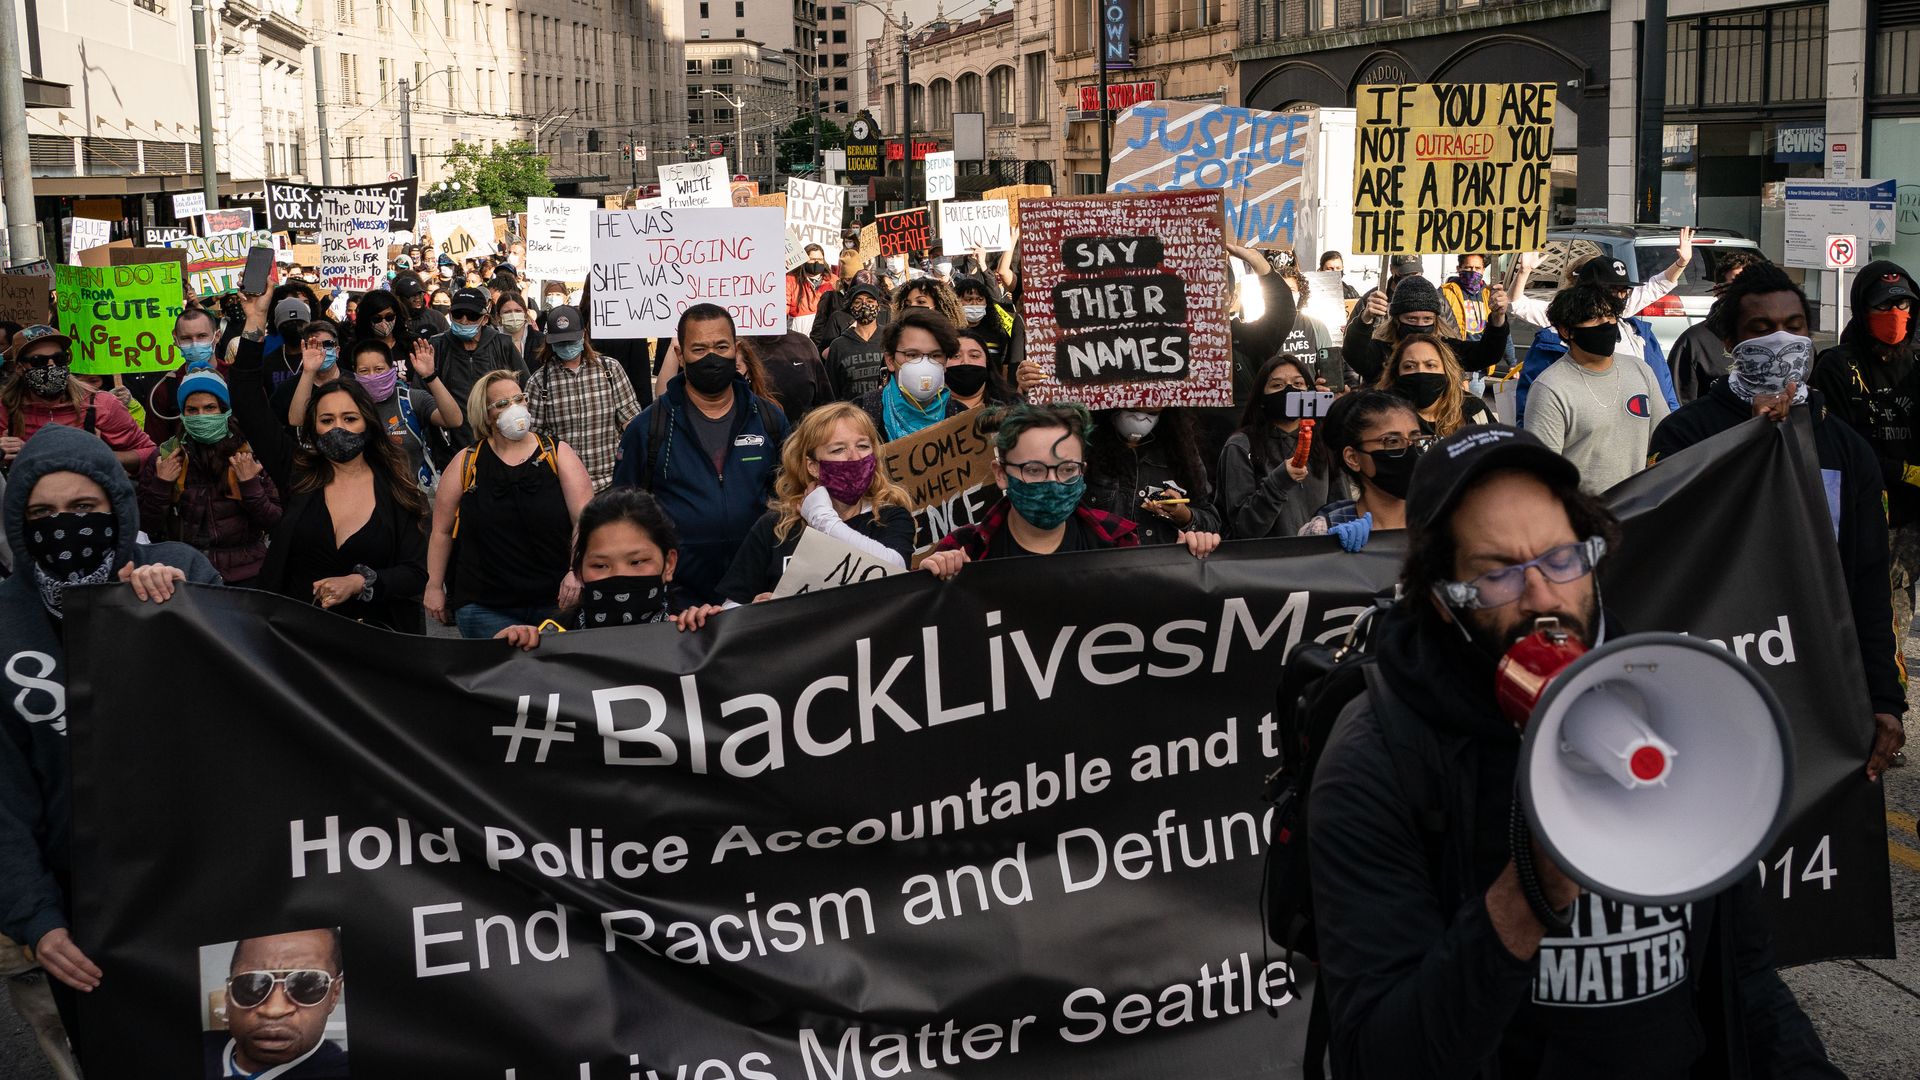 BLM protest in Seattle